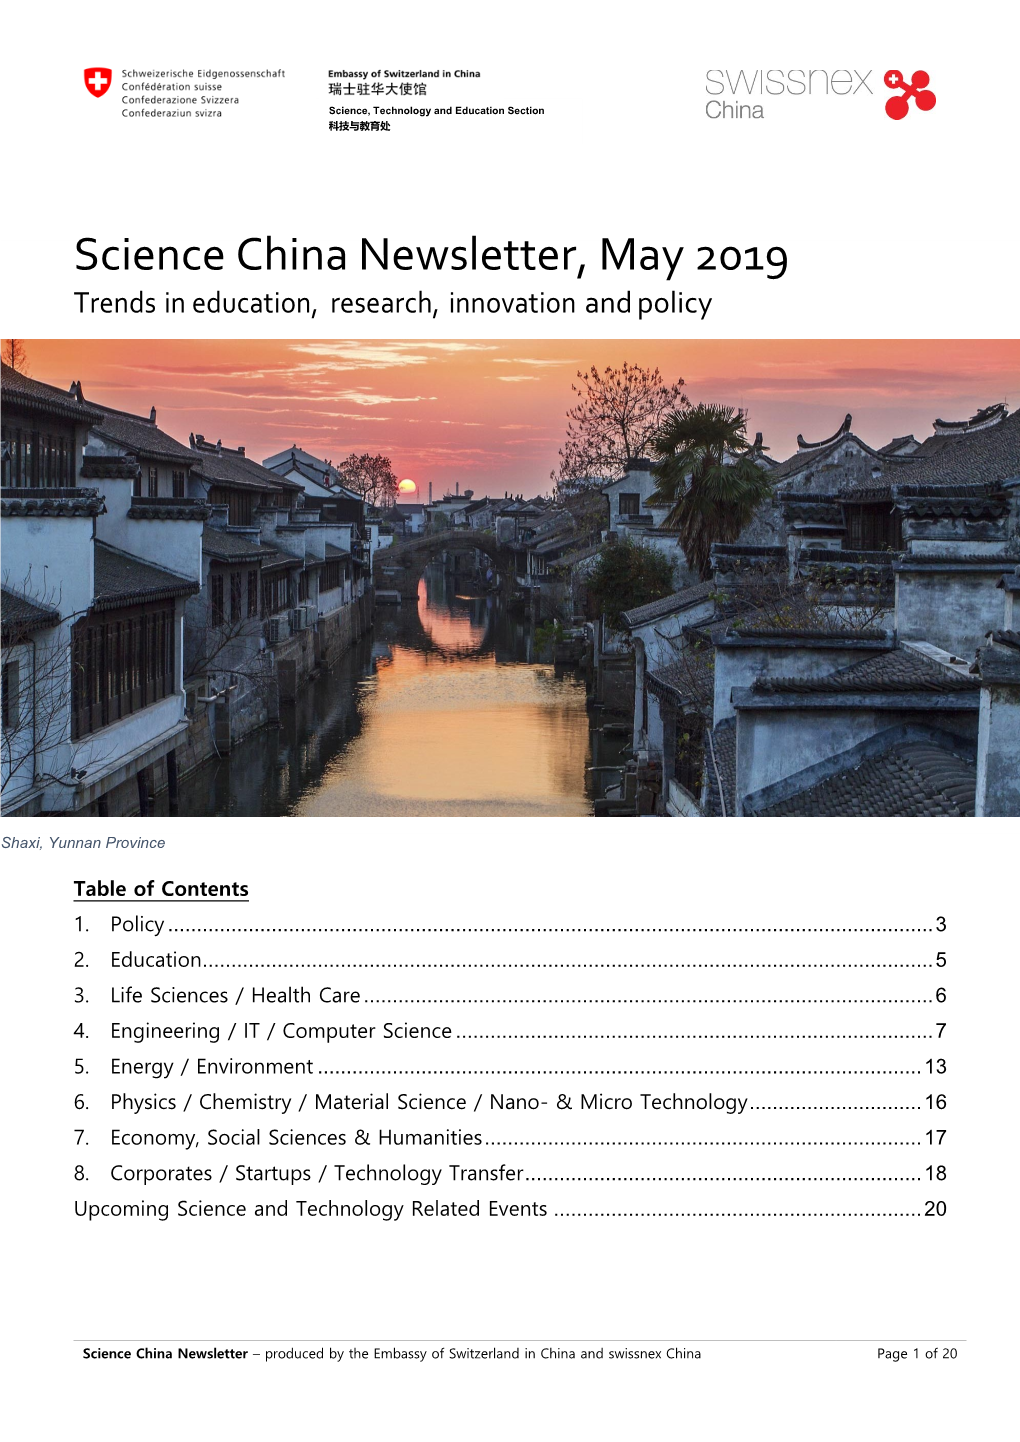 Science China Newsletter, May 2019 Trends in Education, Research, Innovation and Policy